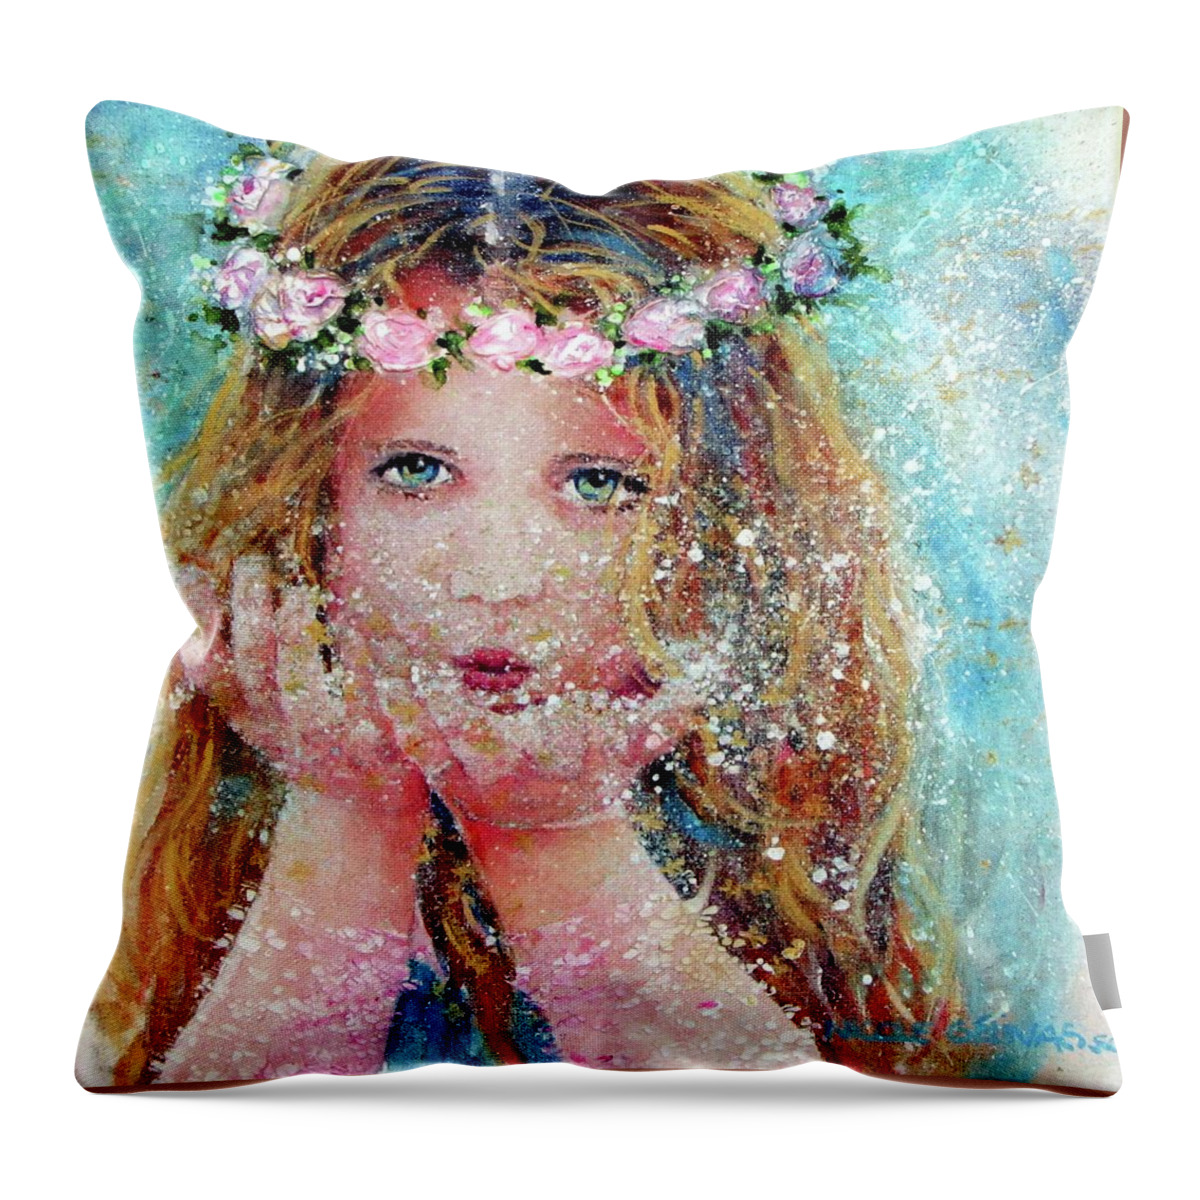 Fairy Throw Pillow featuring the painting Wish by Nicole Gelinas